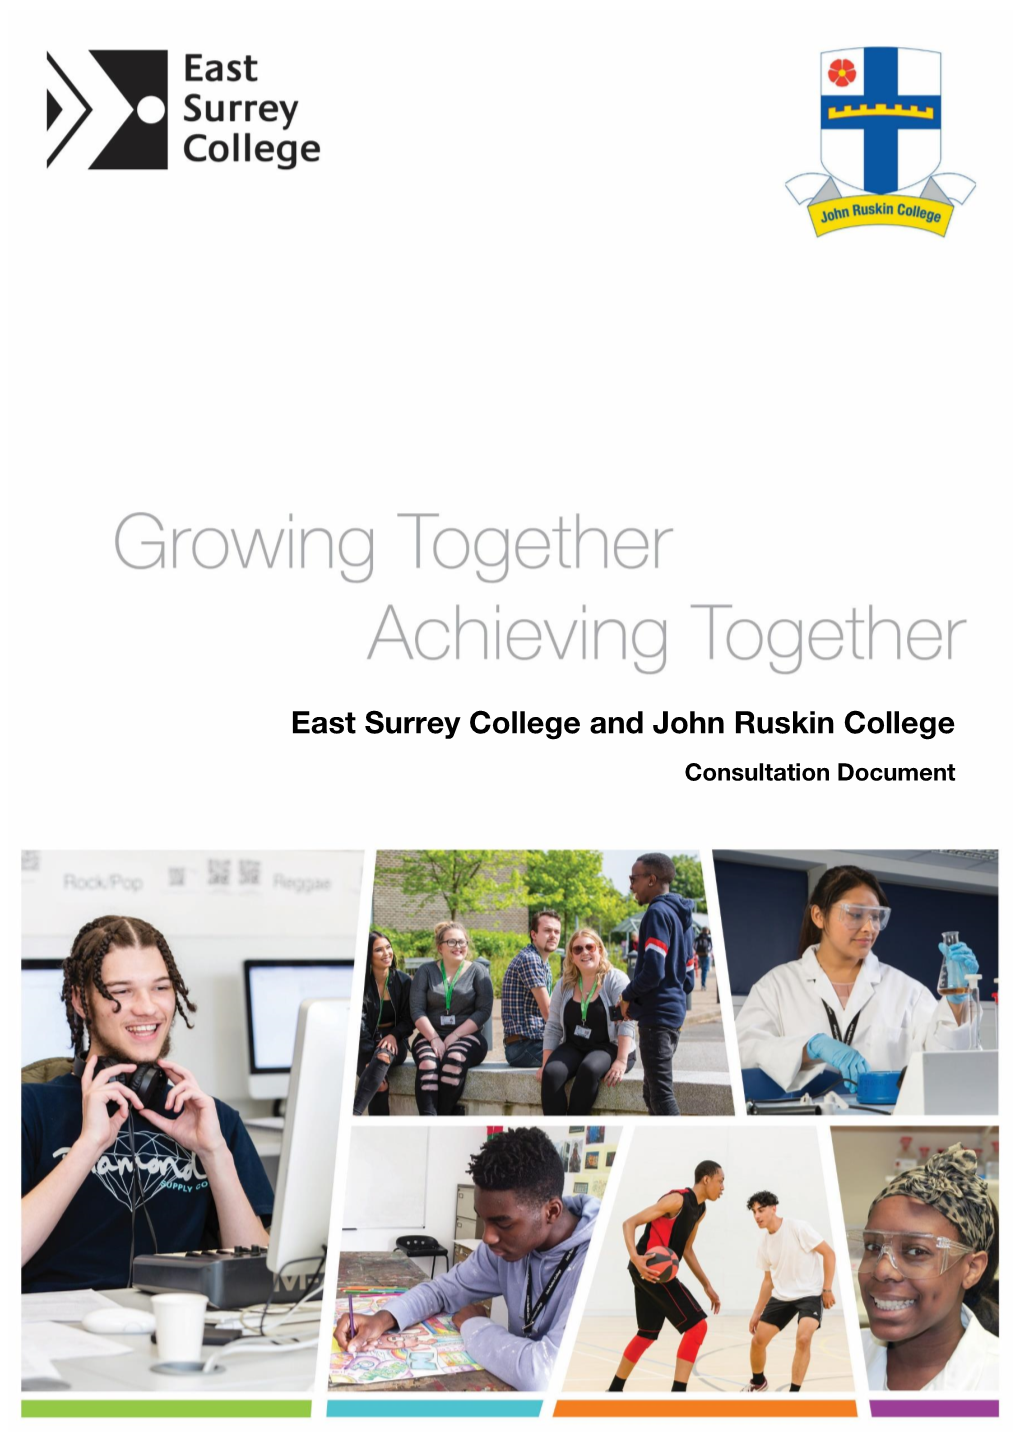 East Surrey College and John Ruskin College Consultation Document